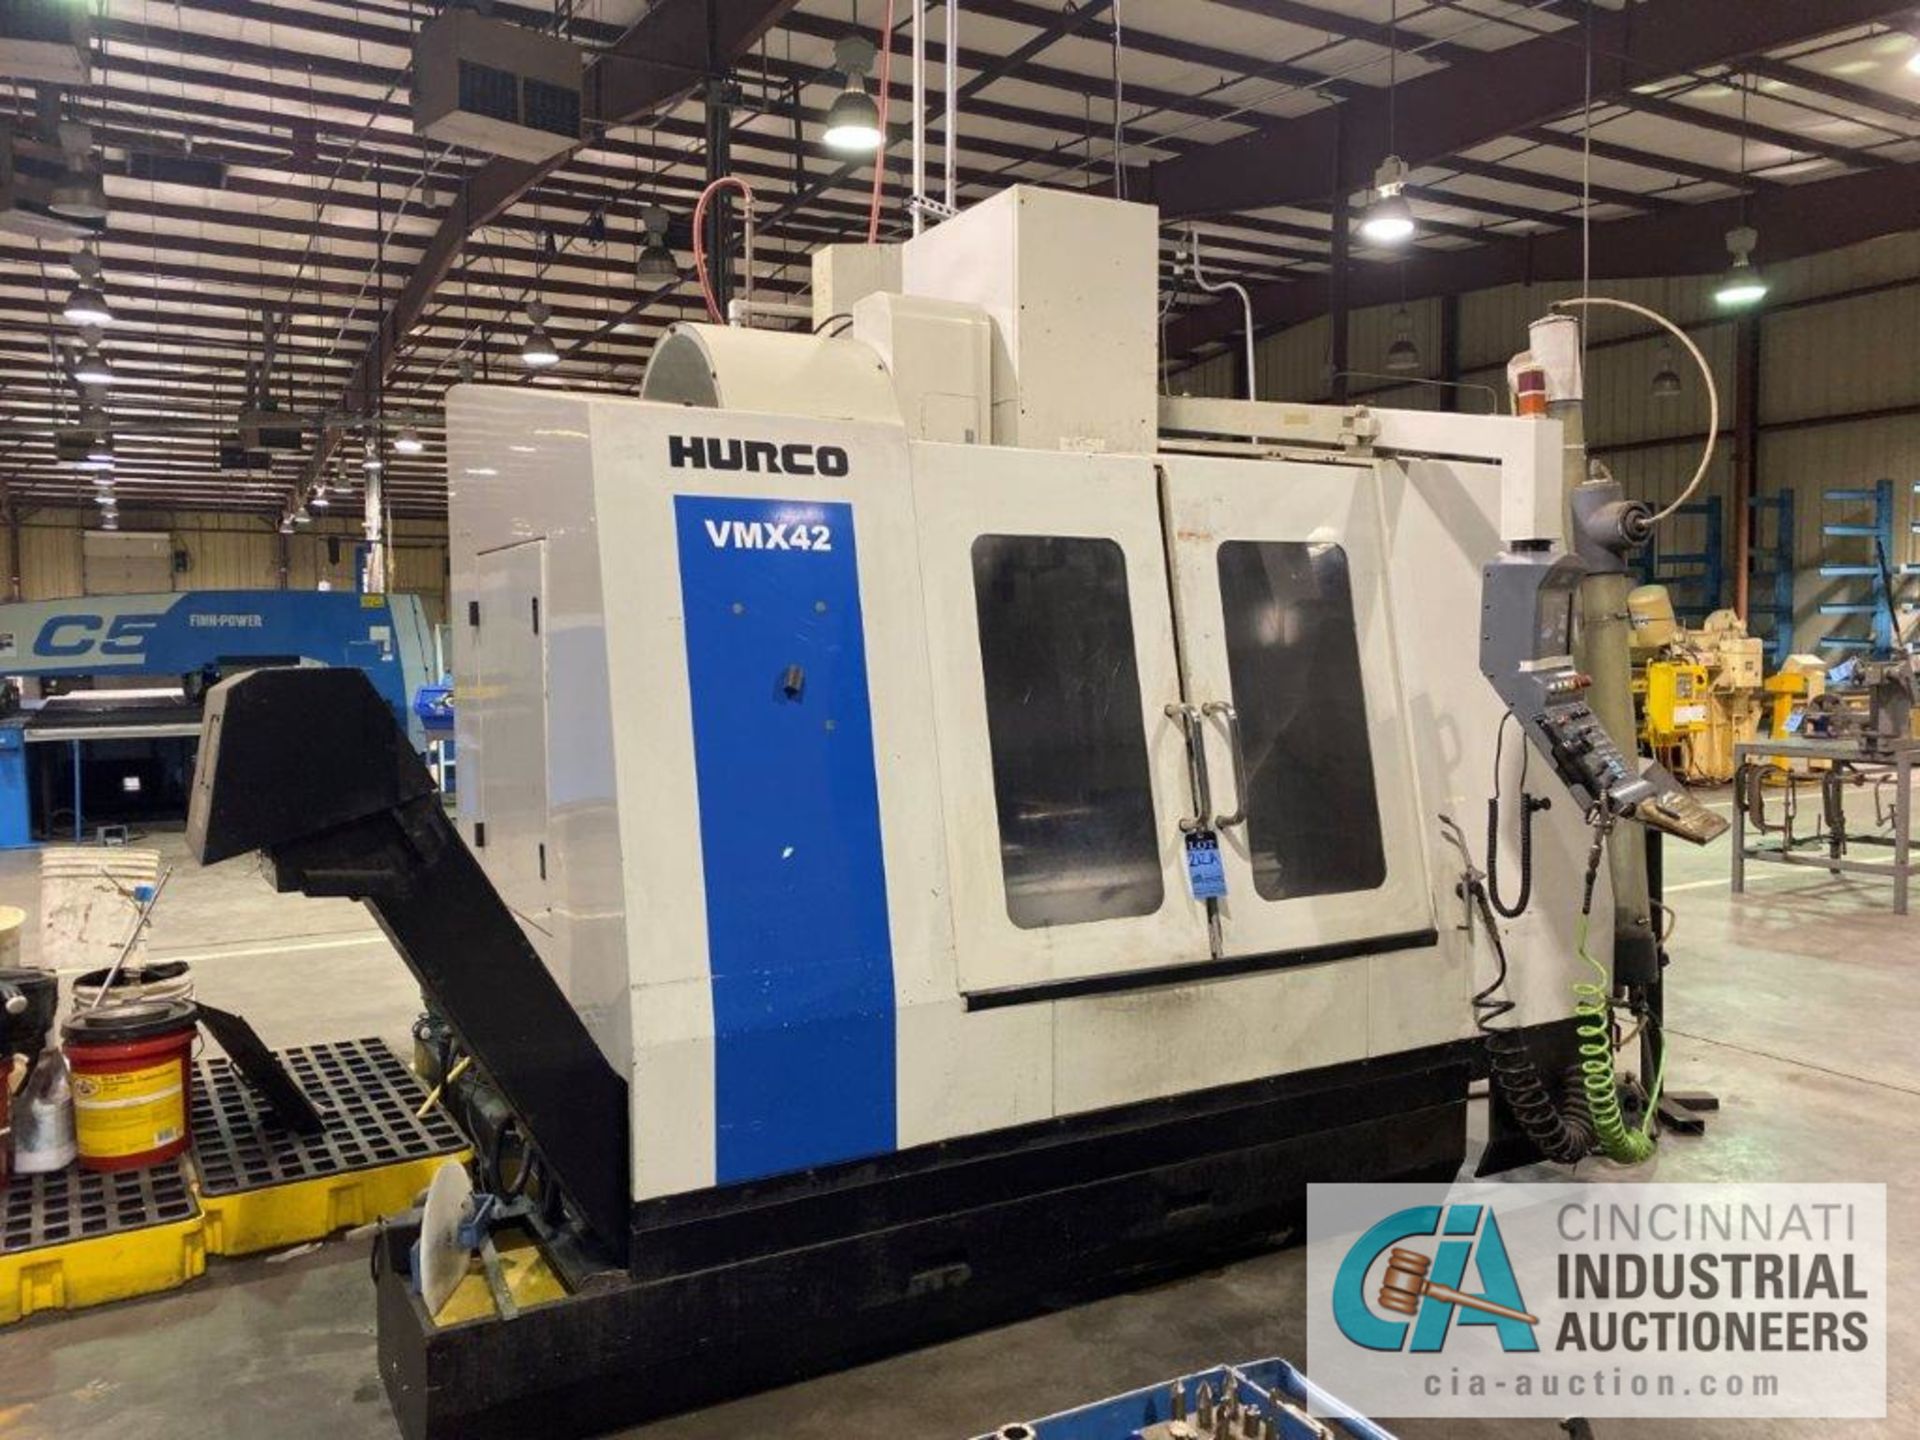 **Hurco Model VMX42 CNC VMC; Mfg. No. H-S40009, s/n S442-06026046DJA, 42" X-Axis, 24" Y-Axis - Image 2 of 10